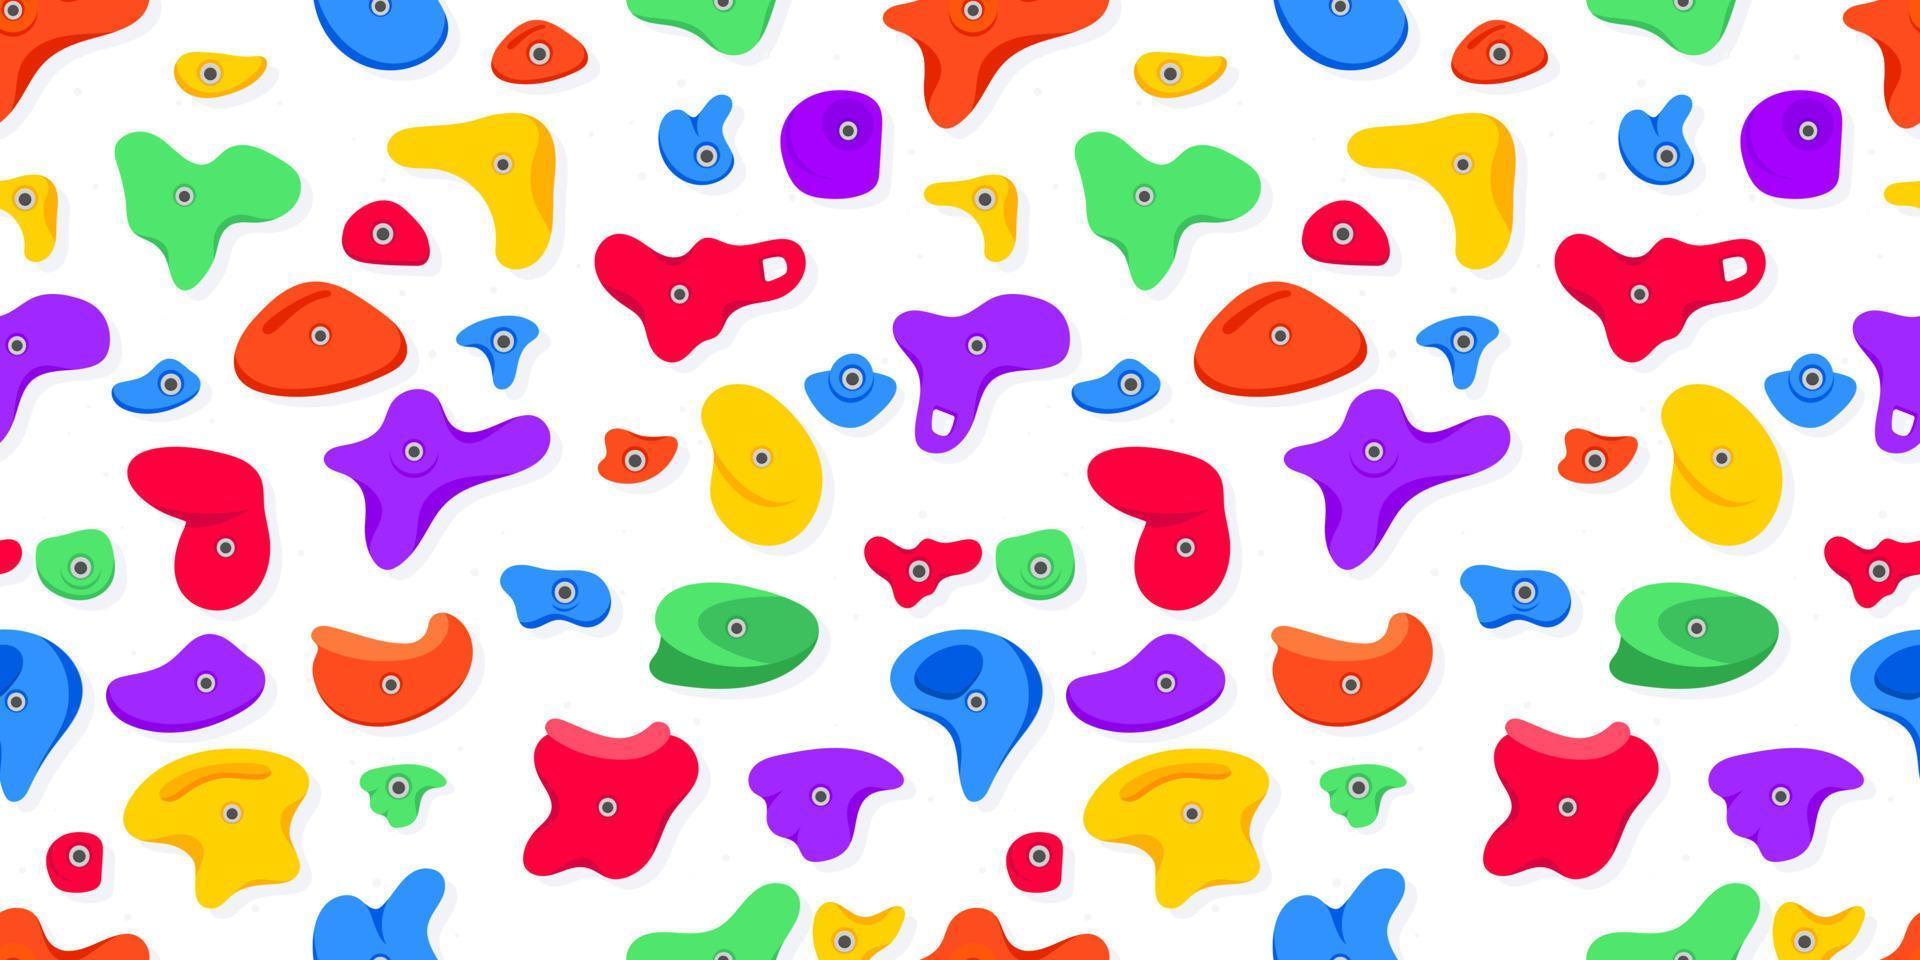 Seamless pattern of climbing grips or holds in the gym bouldering training flat style design vector illustration.